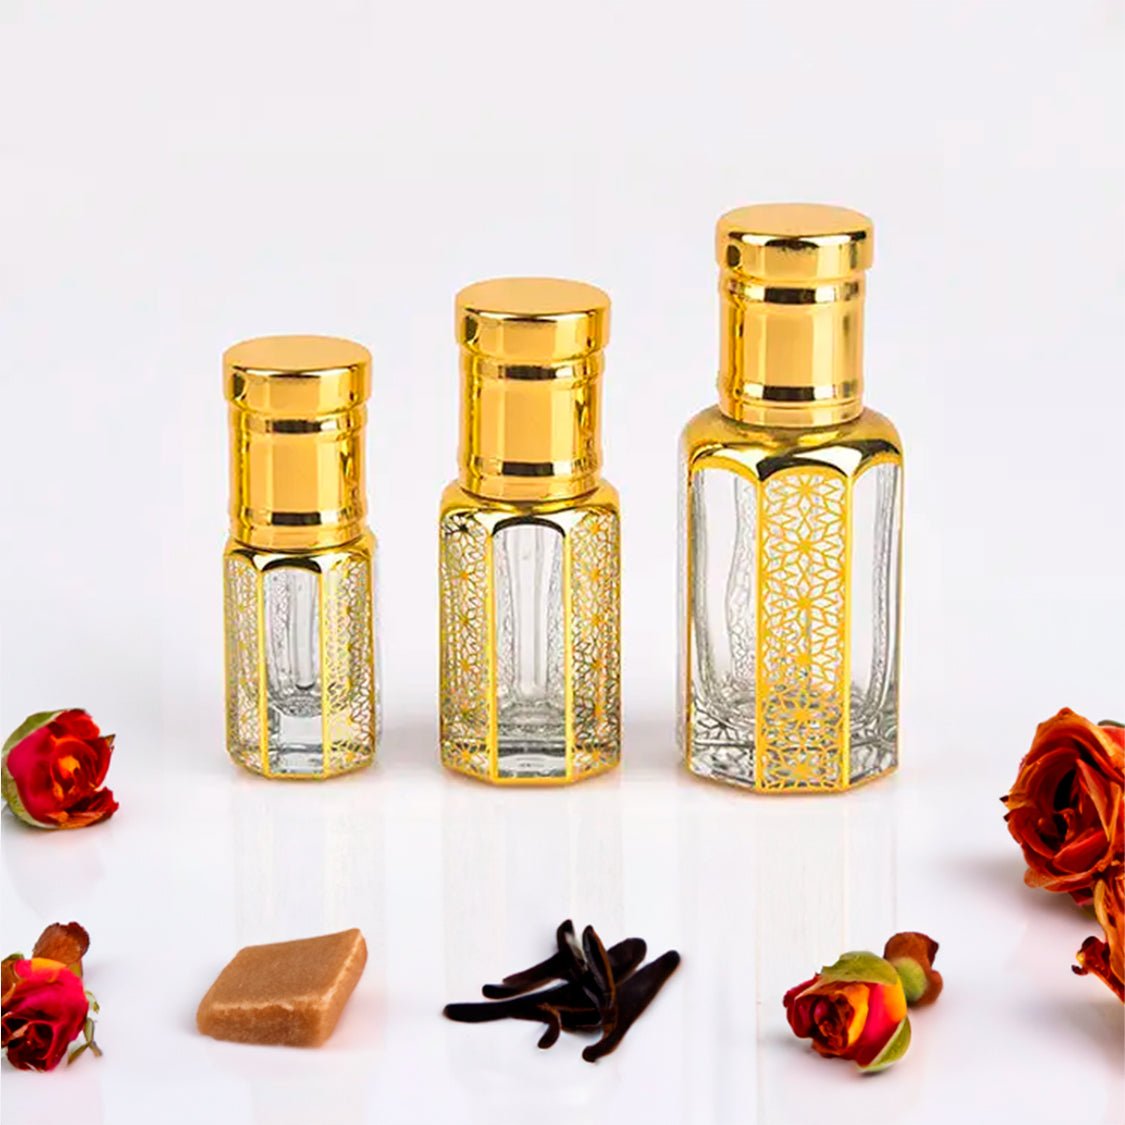 Amir Al Oudh by Flora Five fragrance attar bottles in three sizes with intricate golden designs, surrounded by roses, vanilla beans, and a caramel piece. This long-lasting attar offers a sweet musky and woody fragrance, perfect for those seeking a luxurious and enduring scent experience.